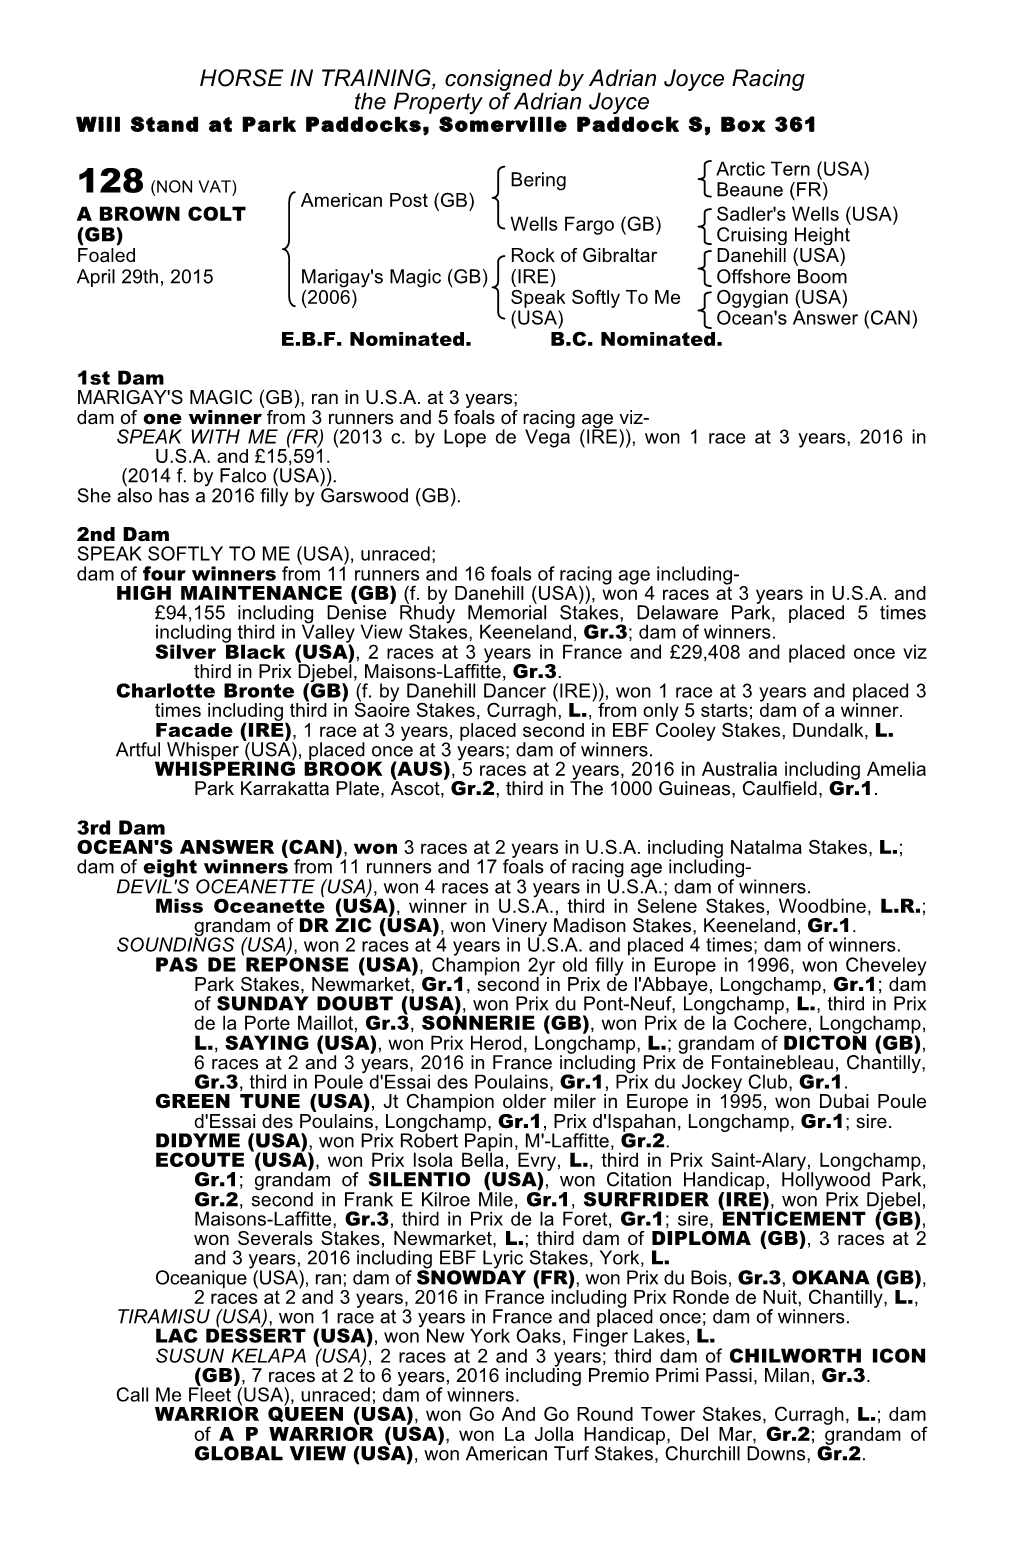 HORSE in TRAINING, Consigned by Adrian Joyce Racing the Property of Adrian Joyce Will Stand at Park Paddocks, Somerville Paddock S, Box 361